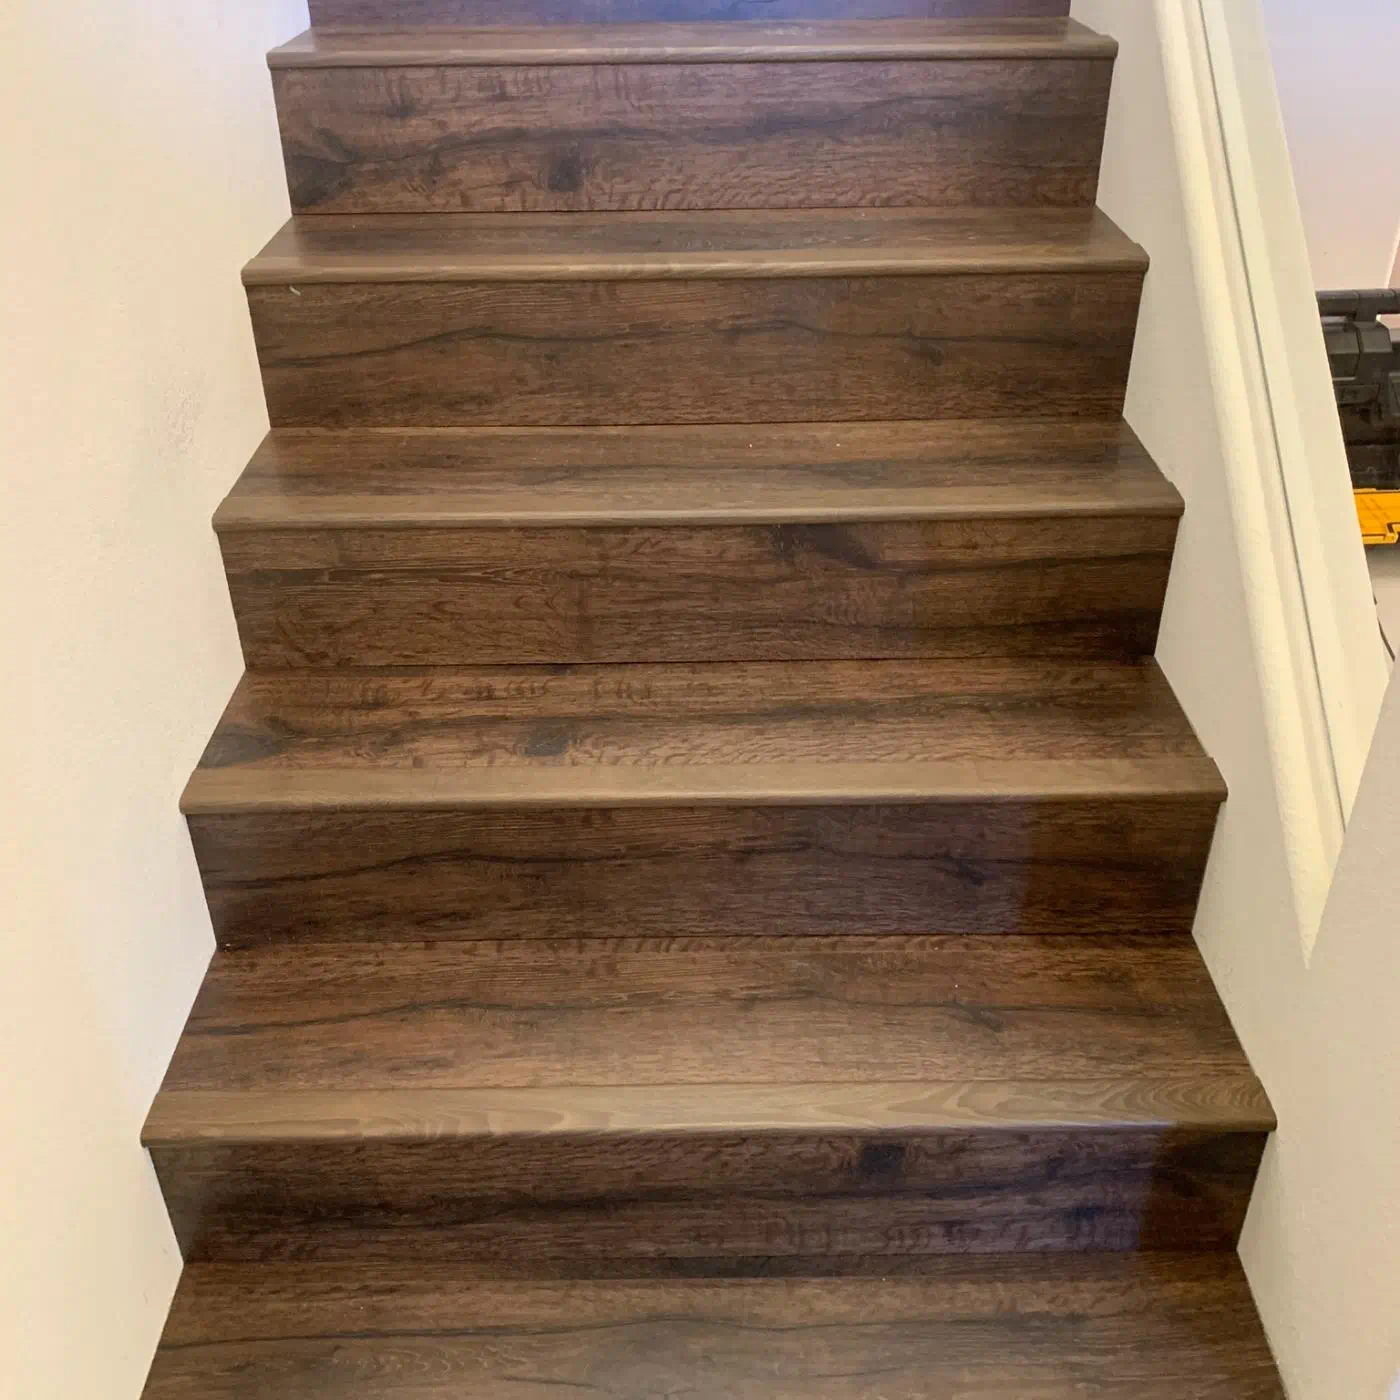 Flooring And Stairs Remodel Prosource, How Do You Cover Stairs With Laminate Flooring